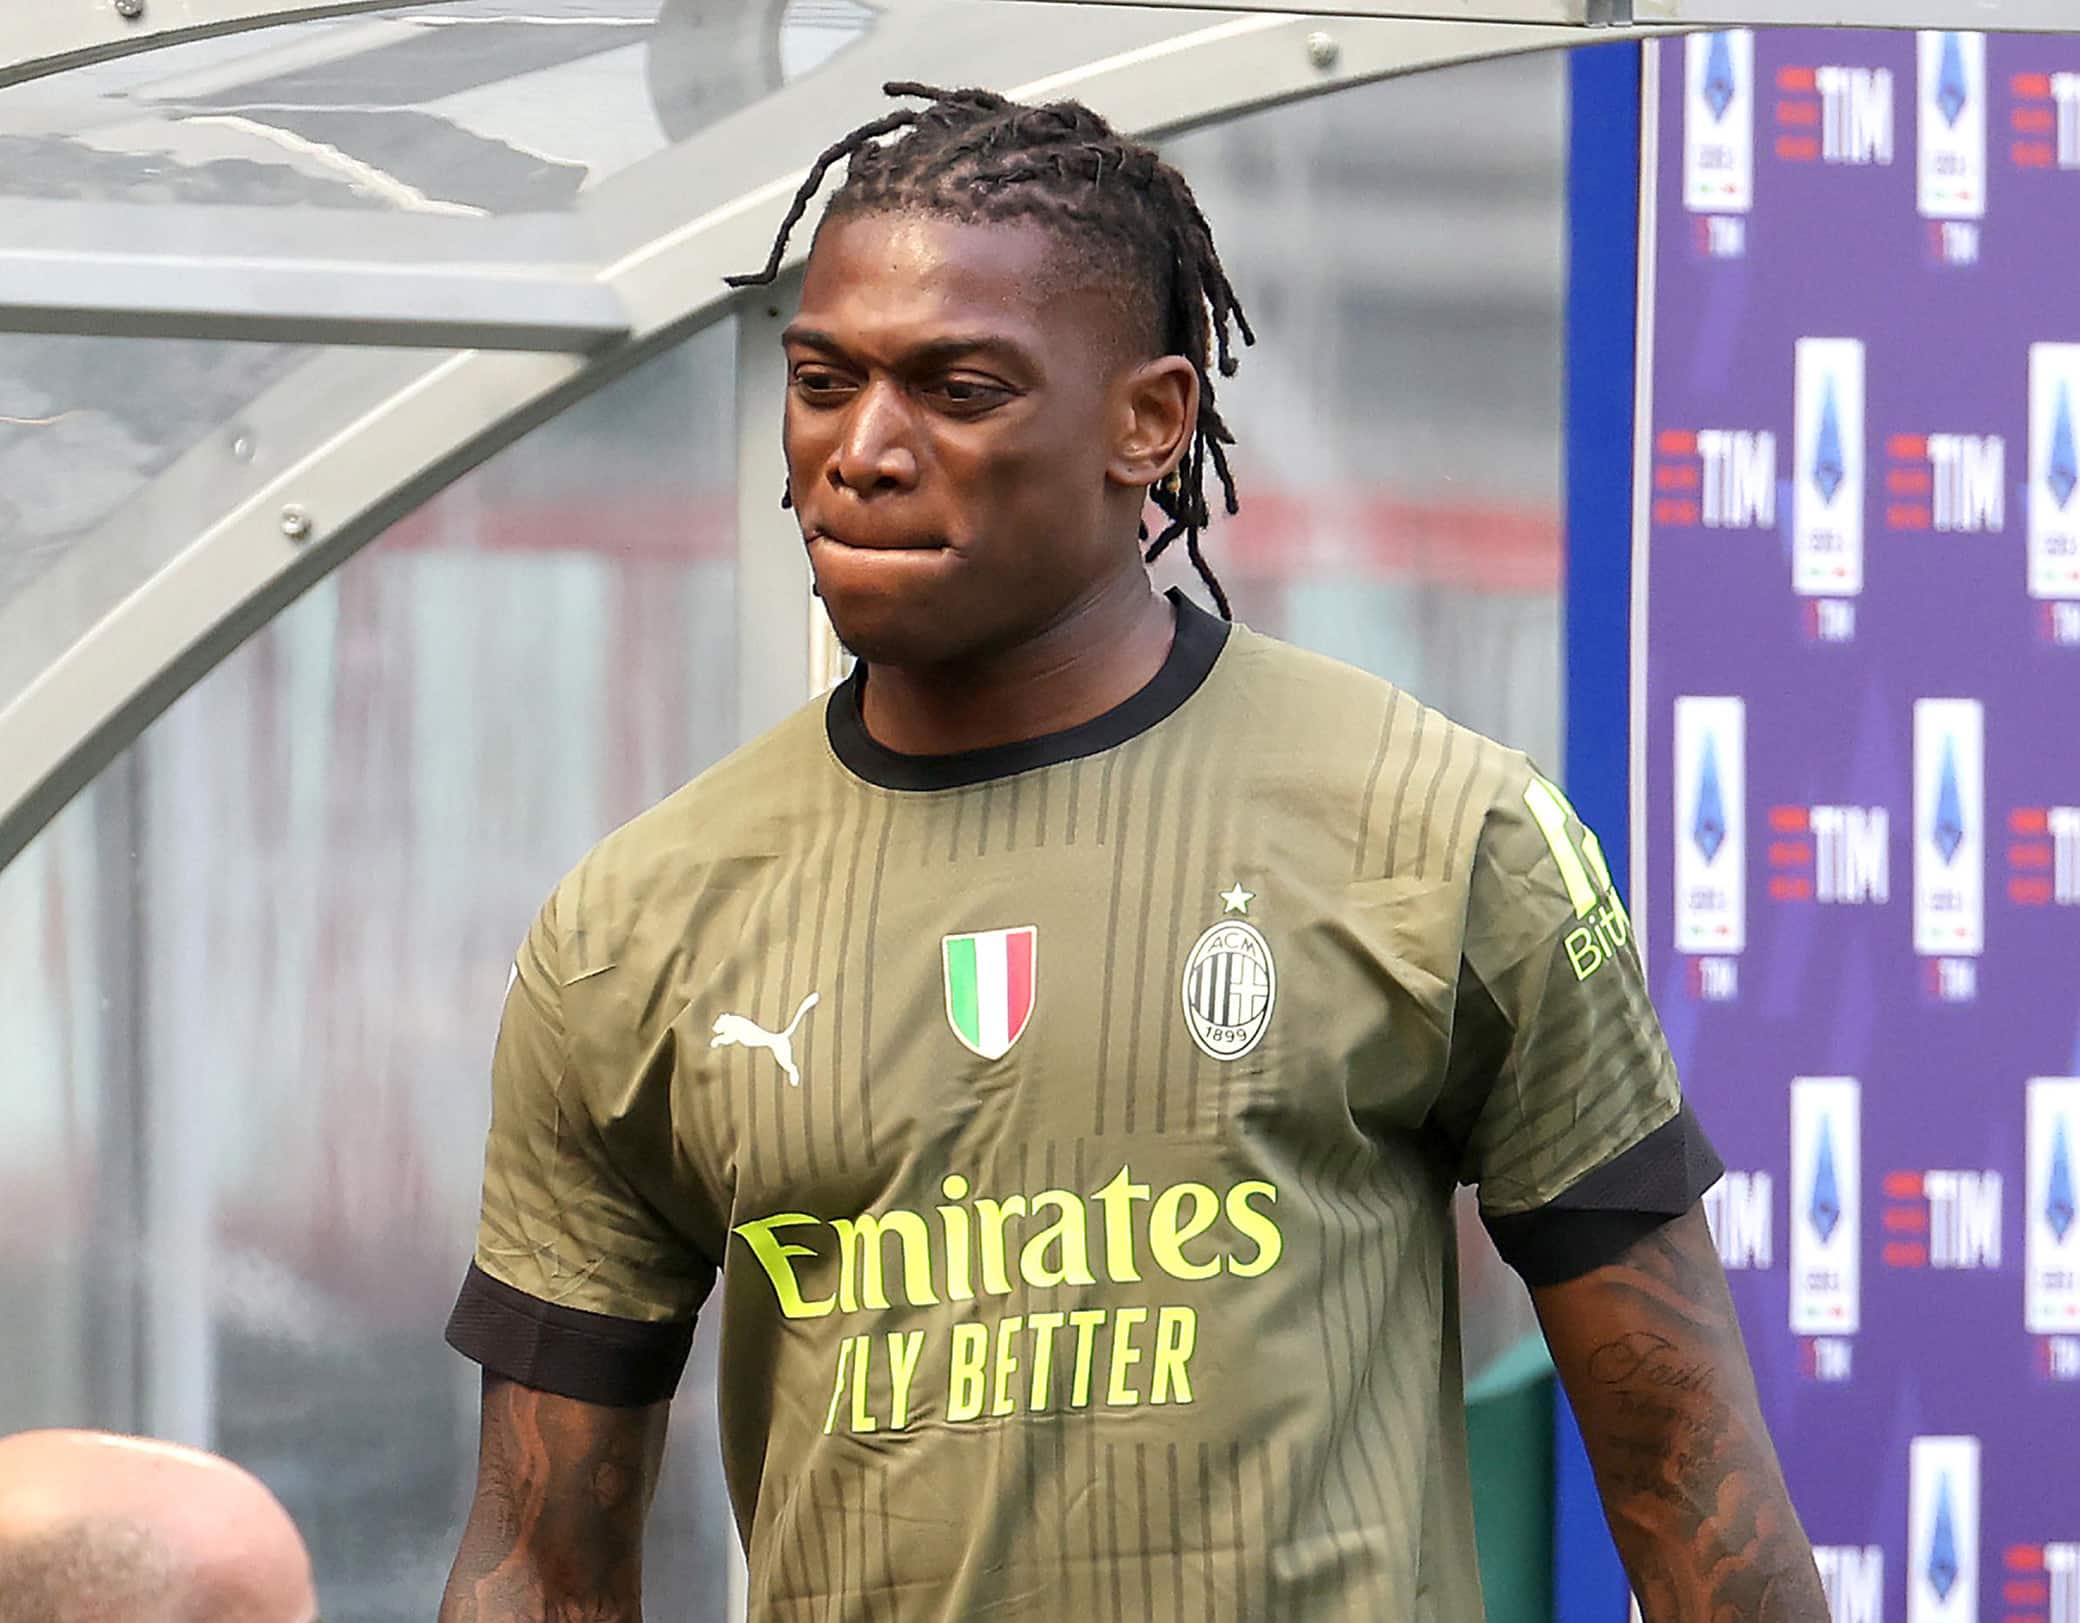 AC Milan’s Rafael Leao leaves the pitch during the Italian serie A soccer match between AC Milan and Lazio at Giuseppe Meazza stadium in Milan, 6 May 2023.
ANSA / MATTEO BAZZI